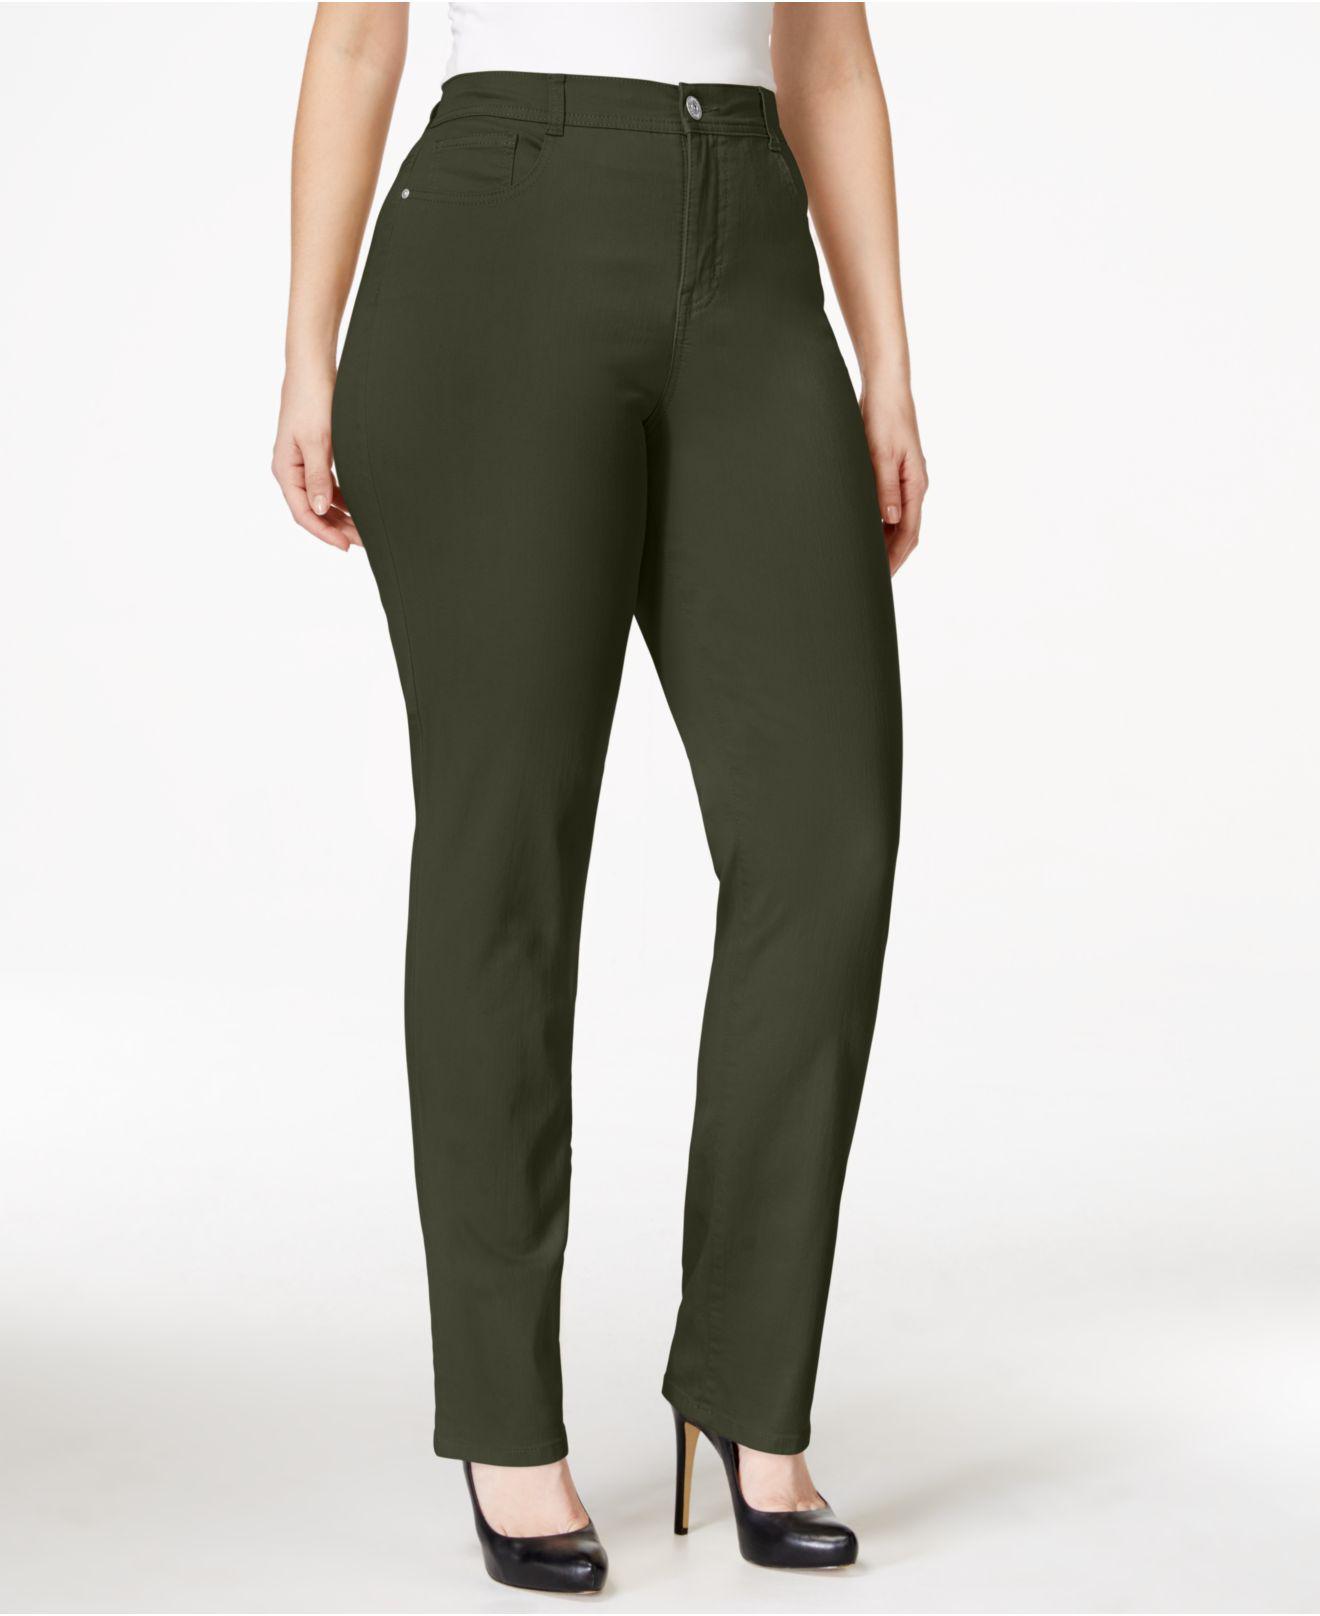 Lyst - Style & Co. Plus Size Jeans, Tummy Control Slim-leg in Green ...